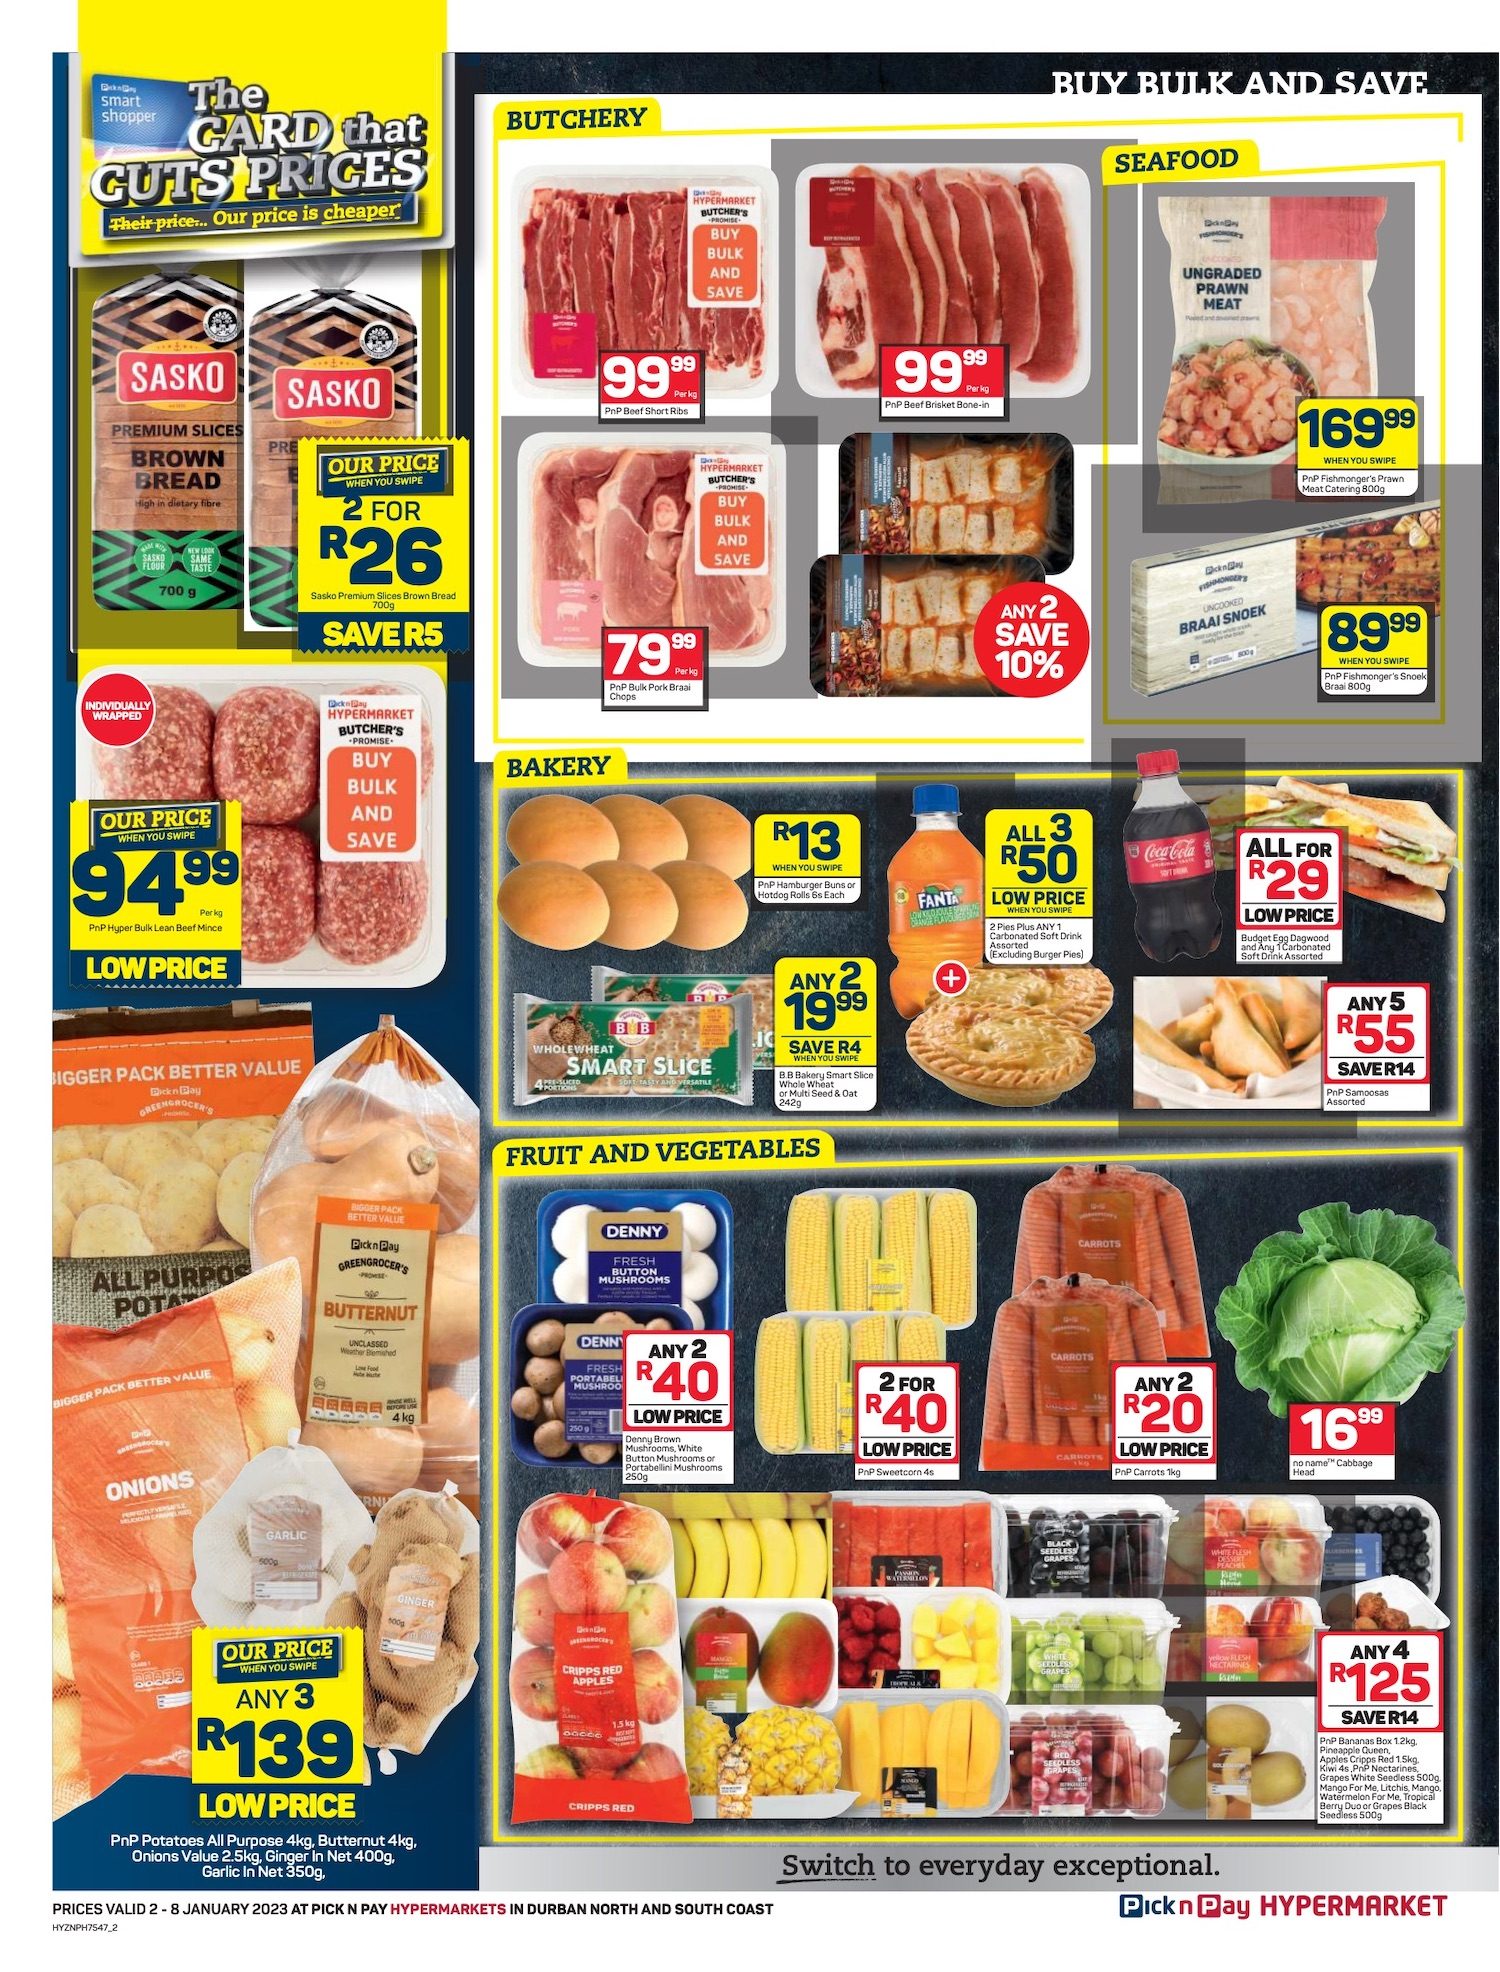 pnp-hyper-specials-2-jan-2023-pick-n-pay-catalogue-pick-n-pay